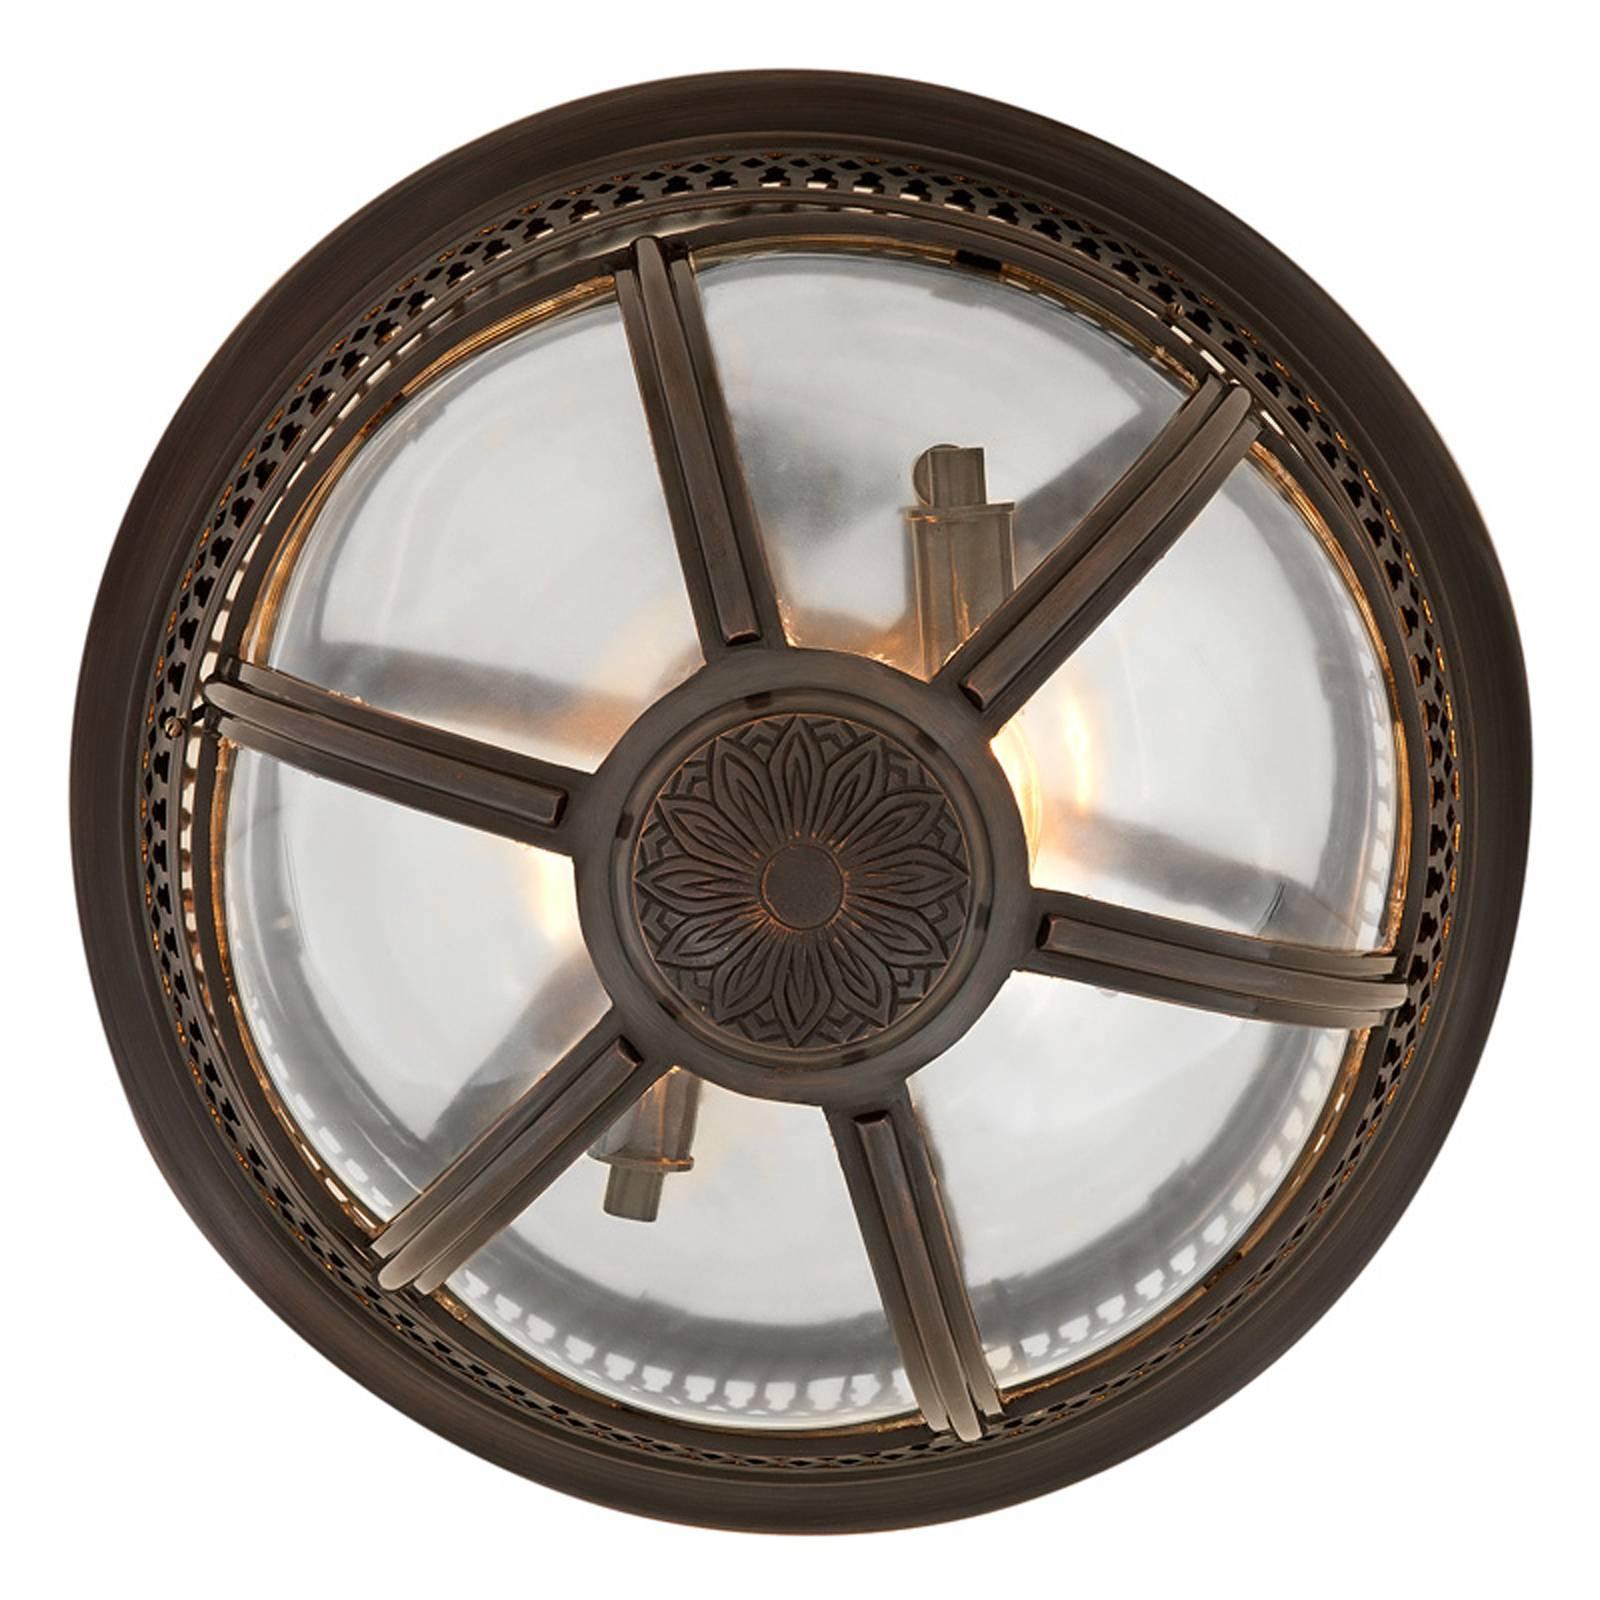 Castle Planet Suspension in Antique Brass or in Nickel or in Bronze Finish 4